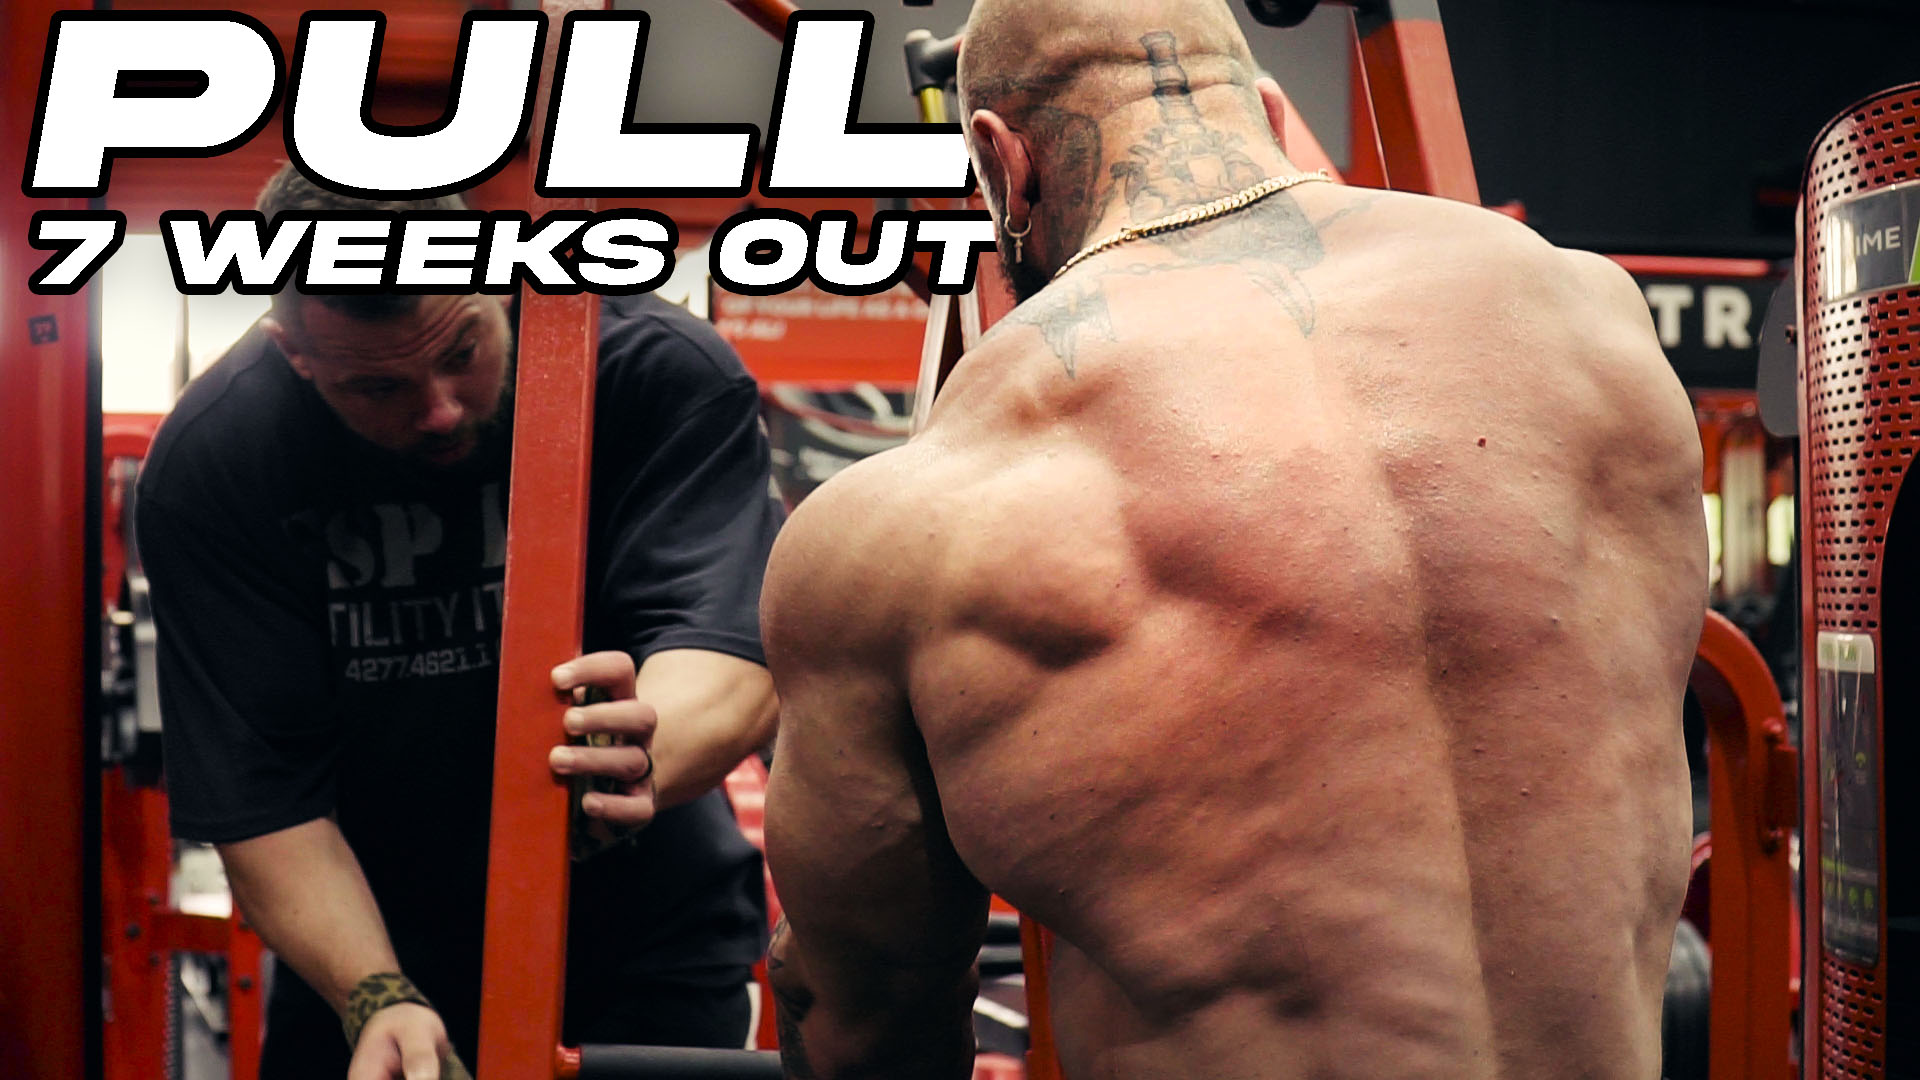 PULL // 7 WEEKS OUT